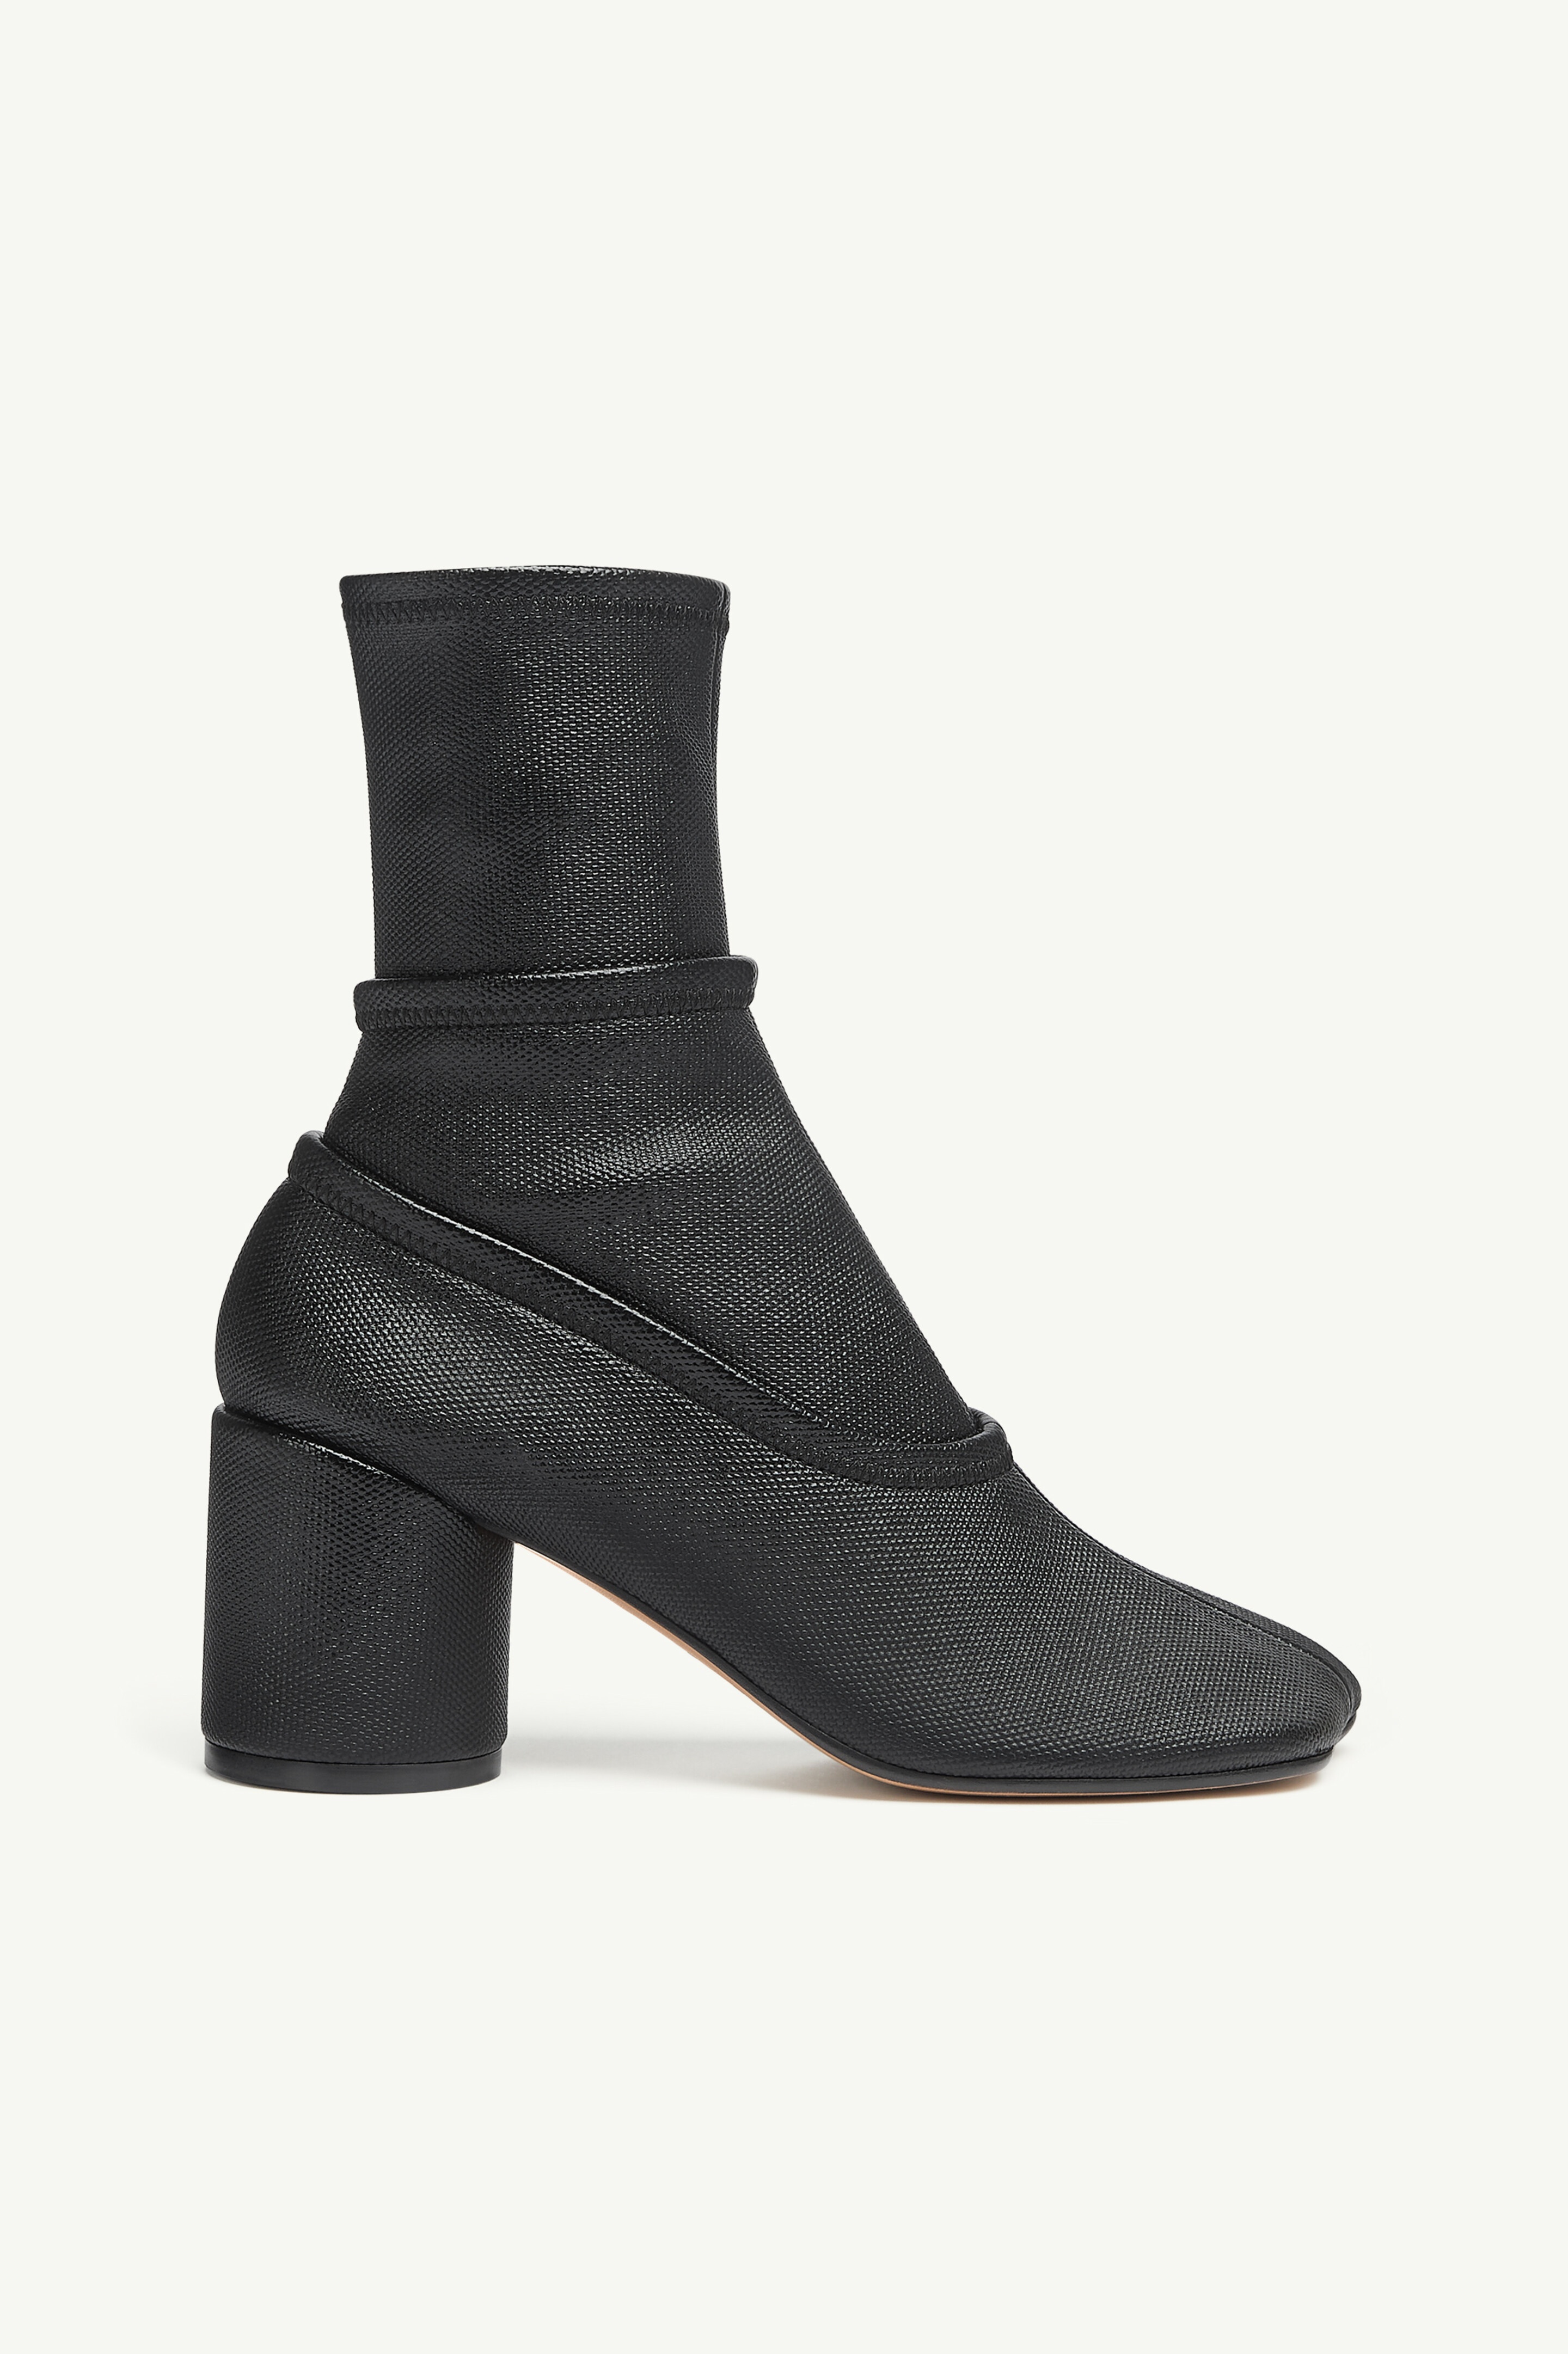 Anatomic ankle boots - 1